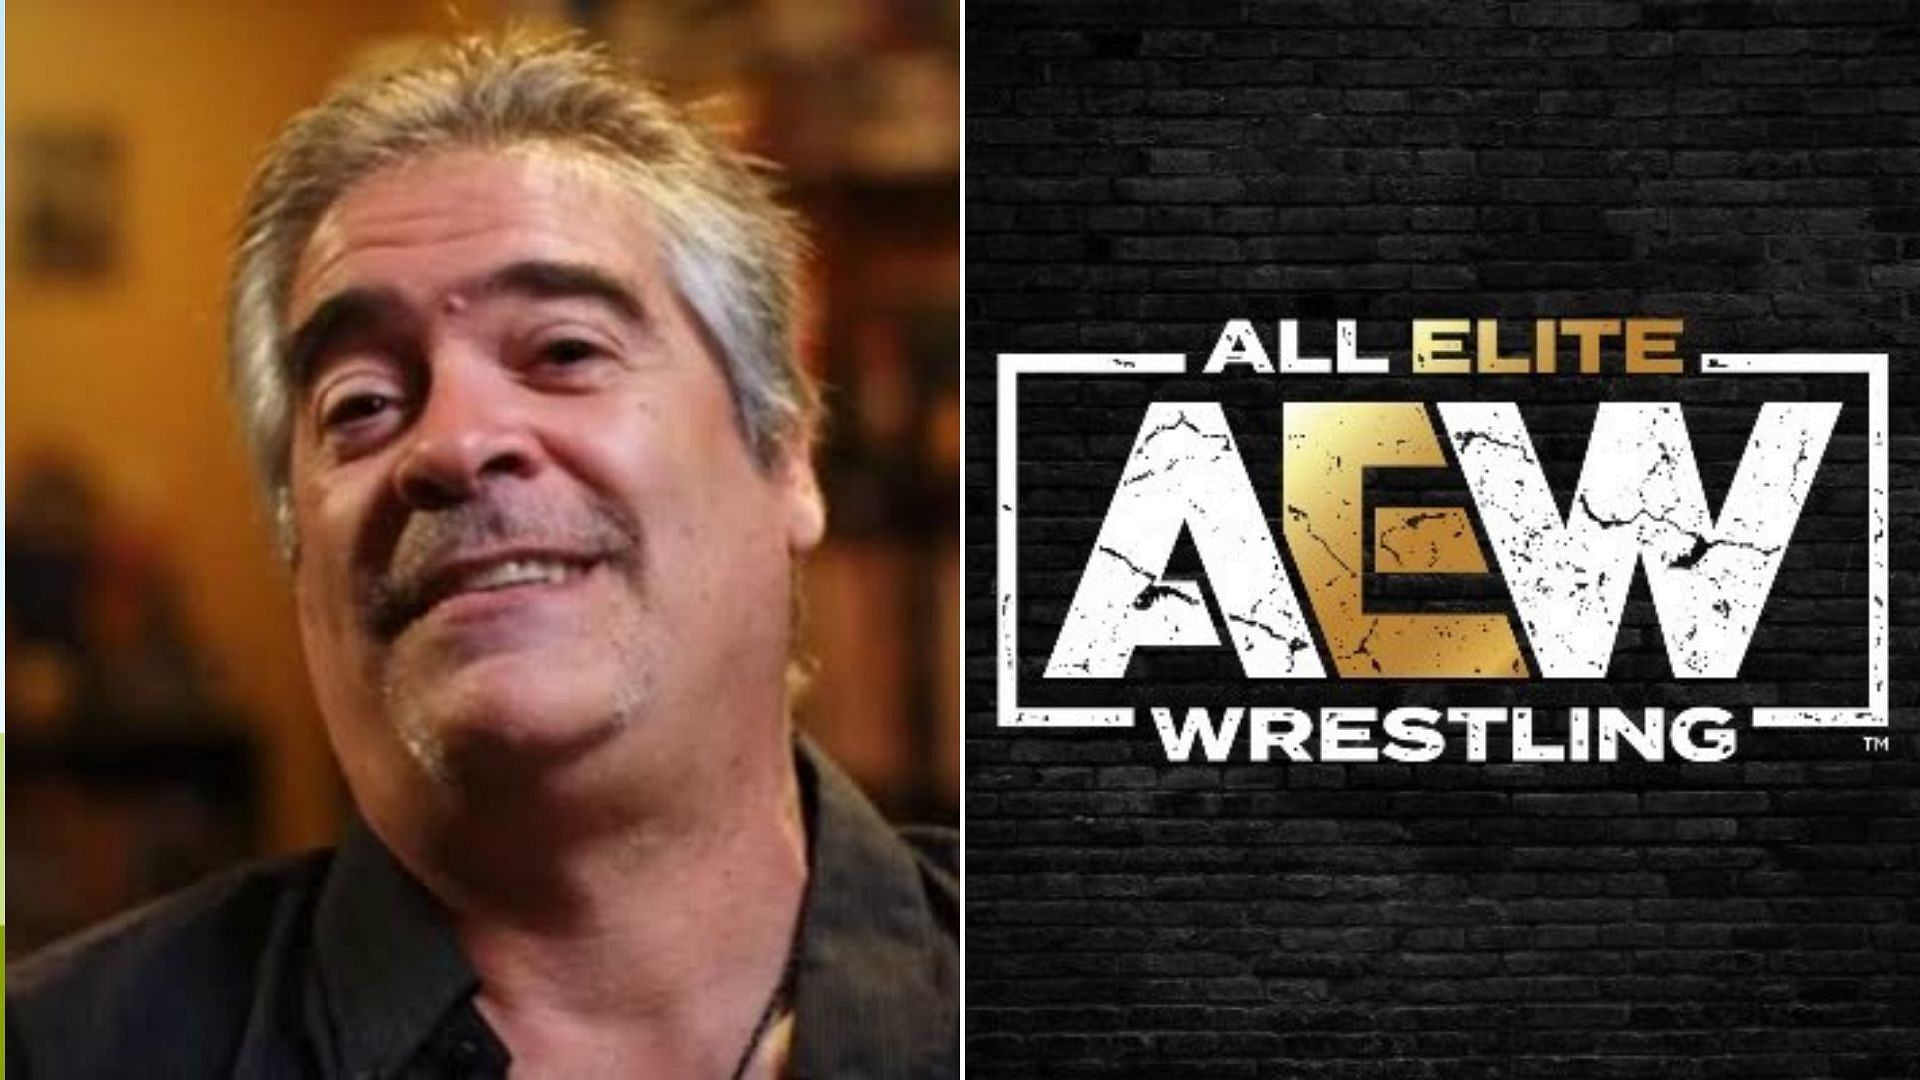 Vince Russo believes Hook will face some challenges in AEW.